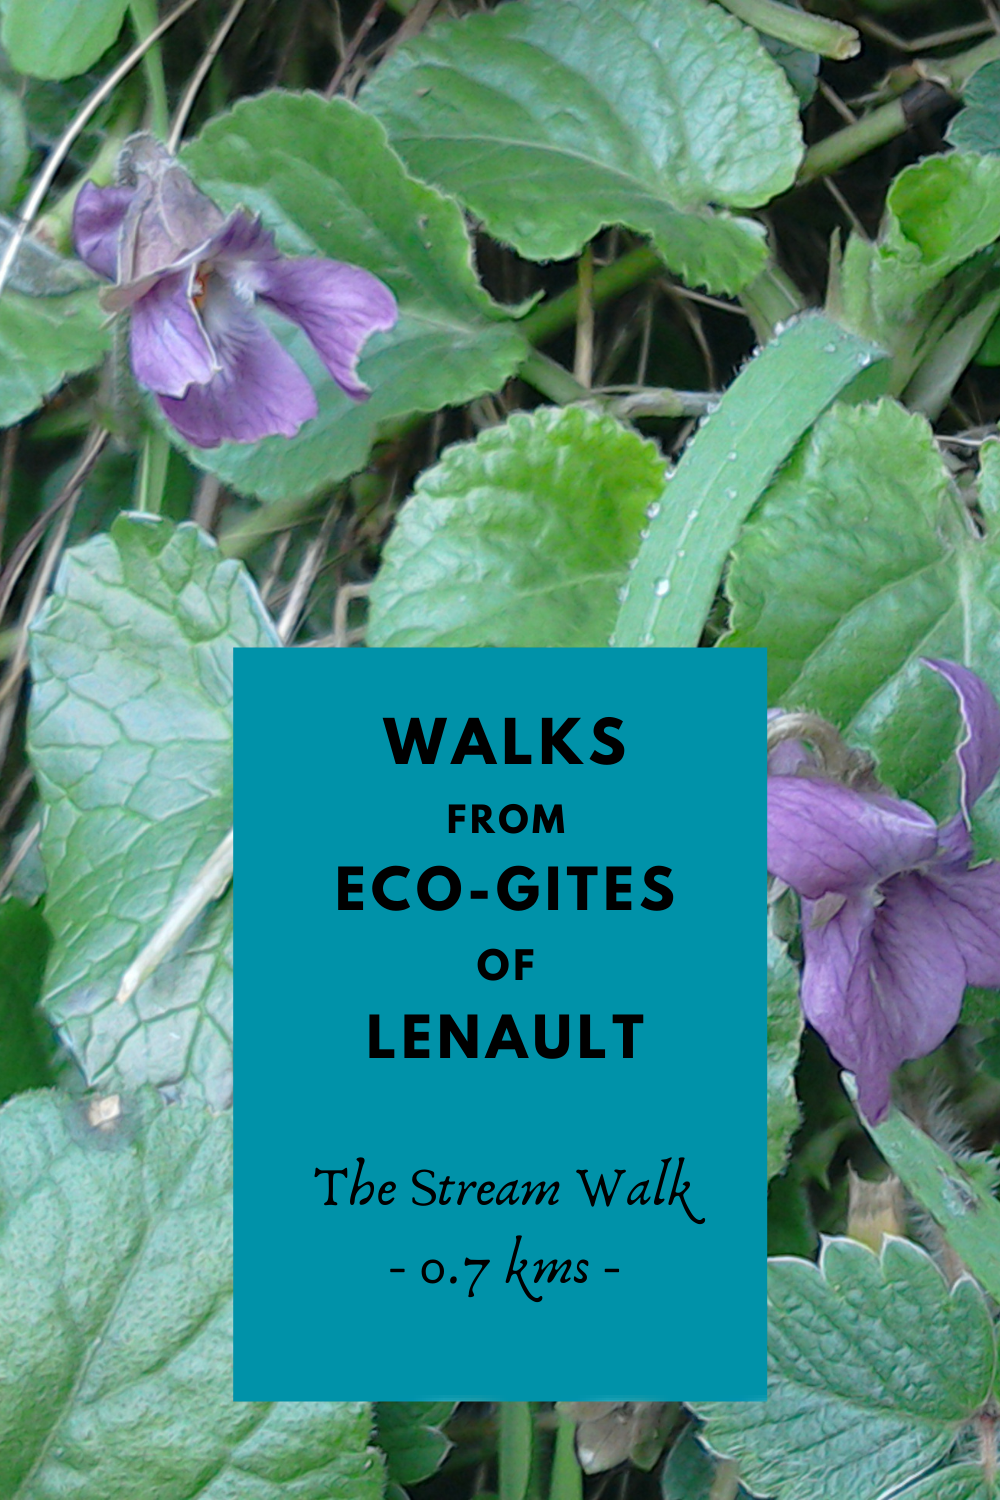 Route for the Stream Walk, Eco-Gites of Lenault, Normandy, France